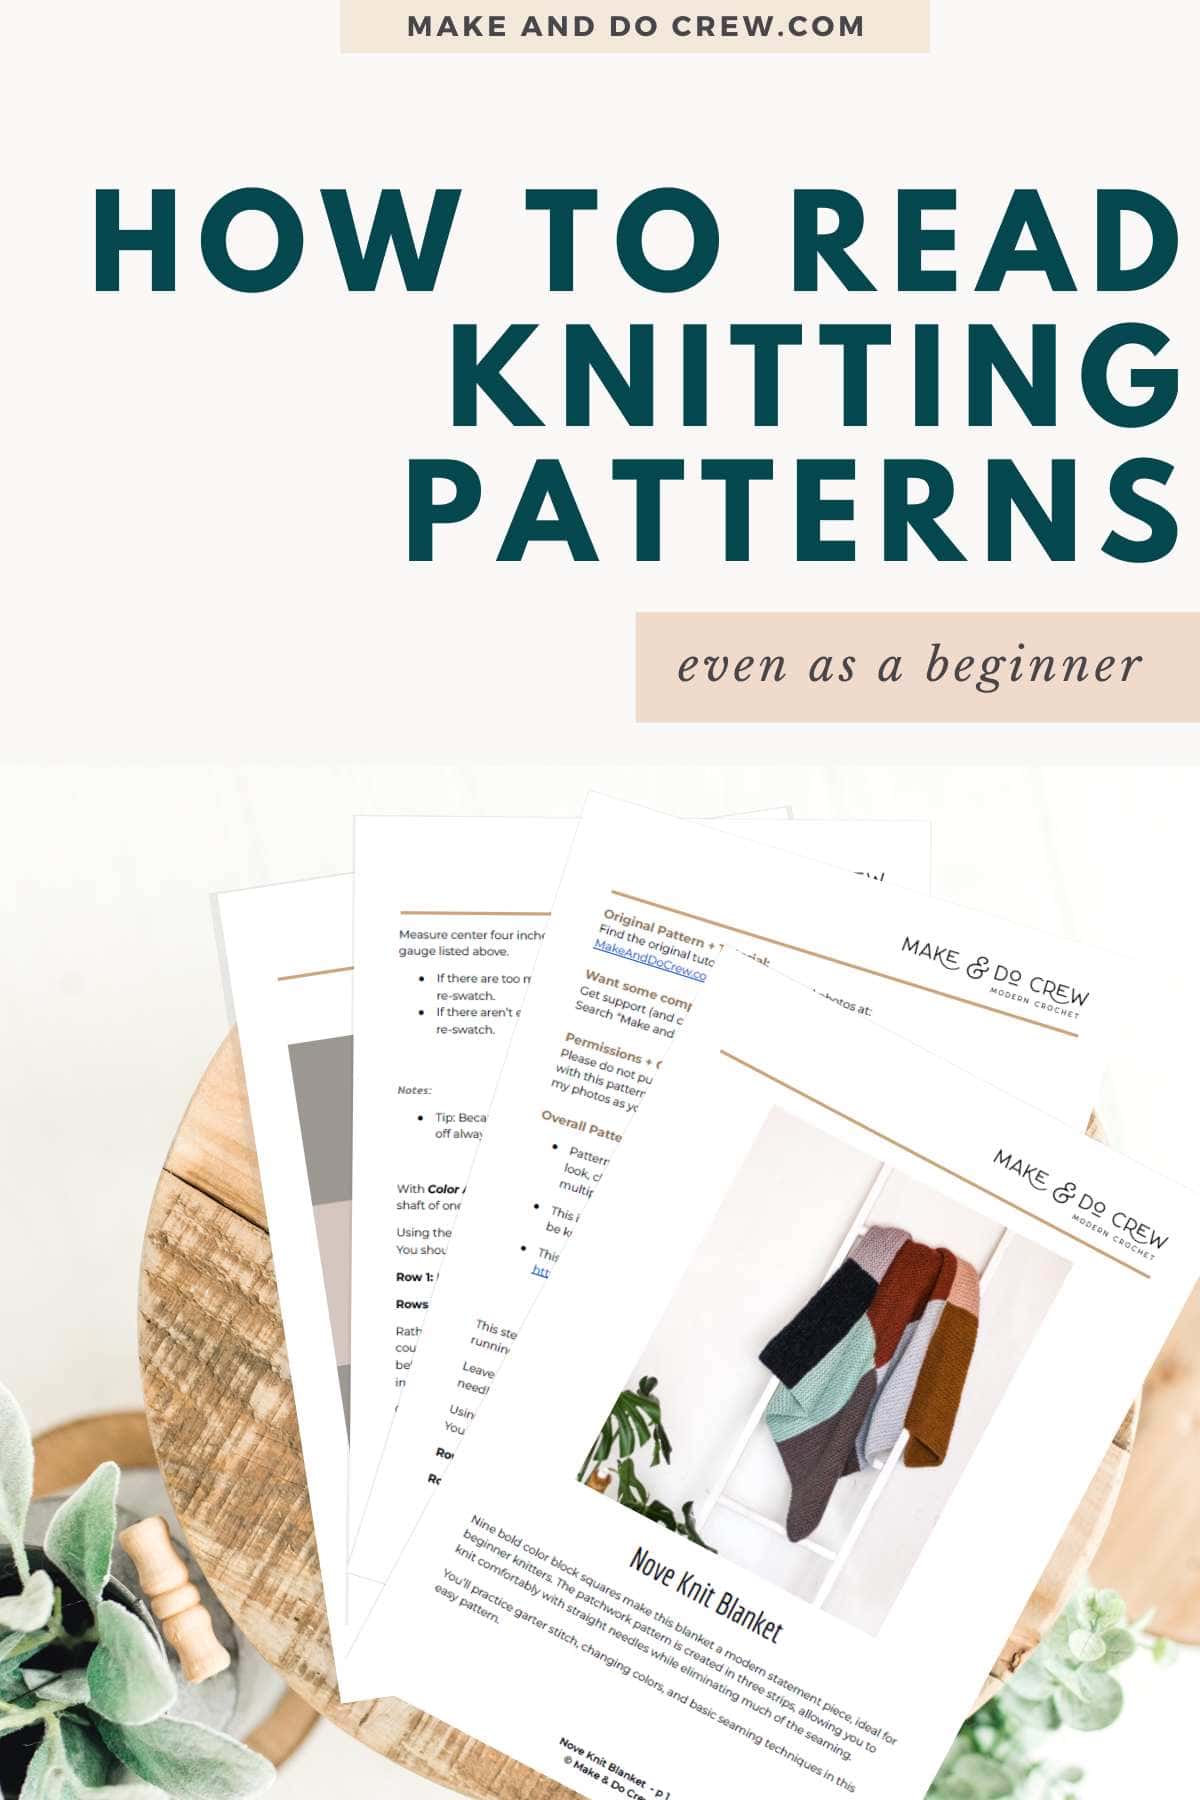 How to read knitting patterns for beginners guide.